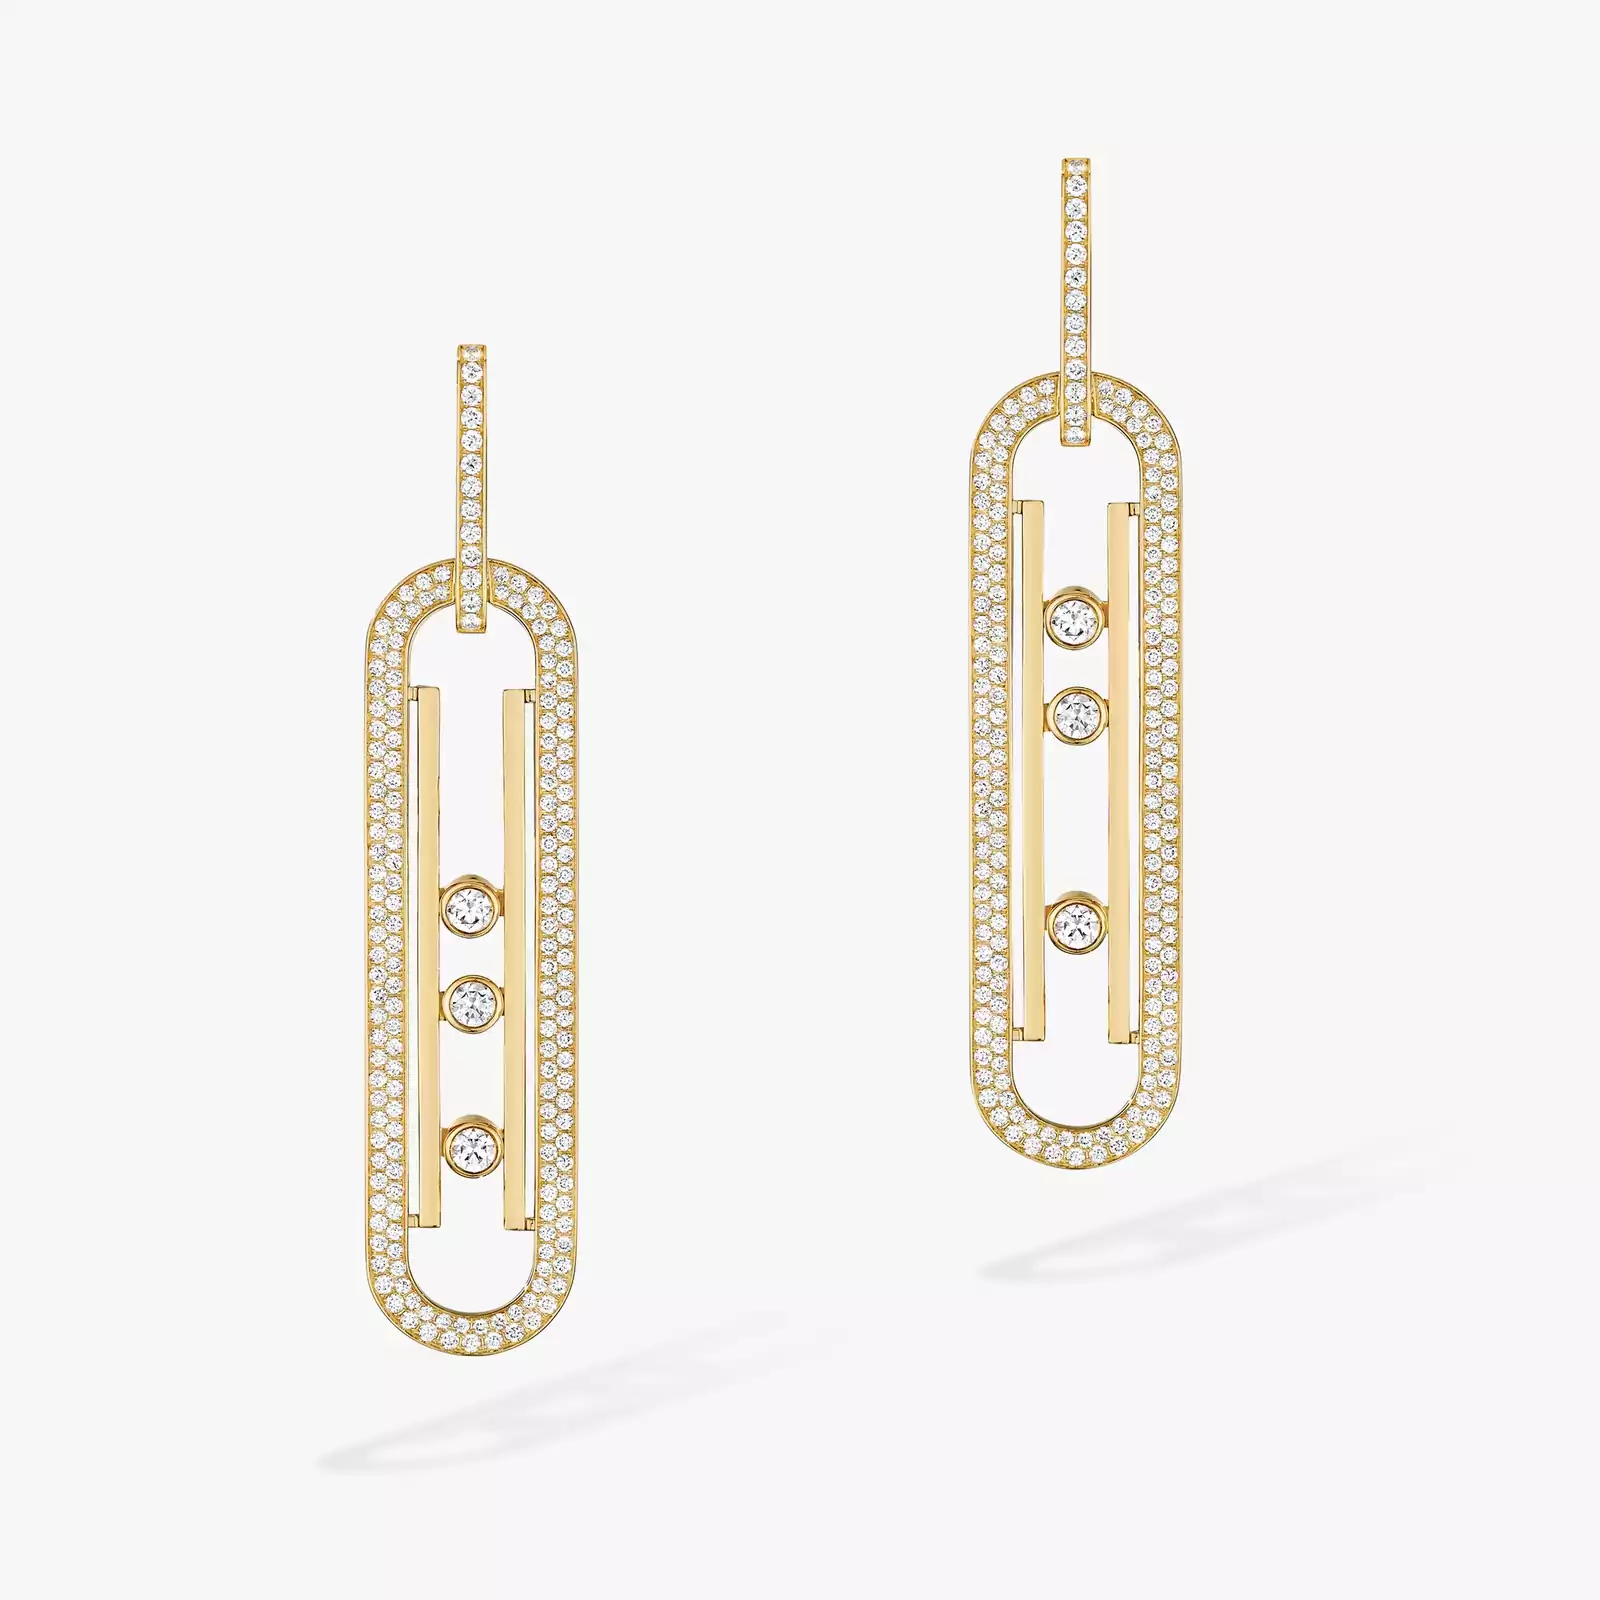 Move 10th Anniversary XL Yellow Gold For Her Diamond Earrings 06823-YG